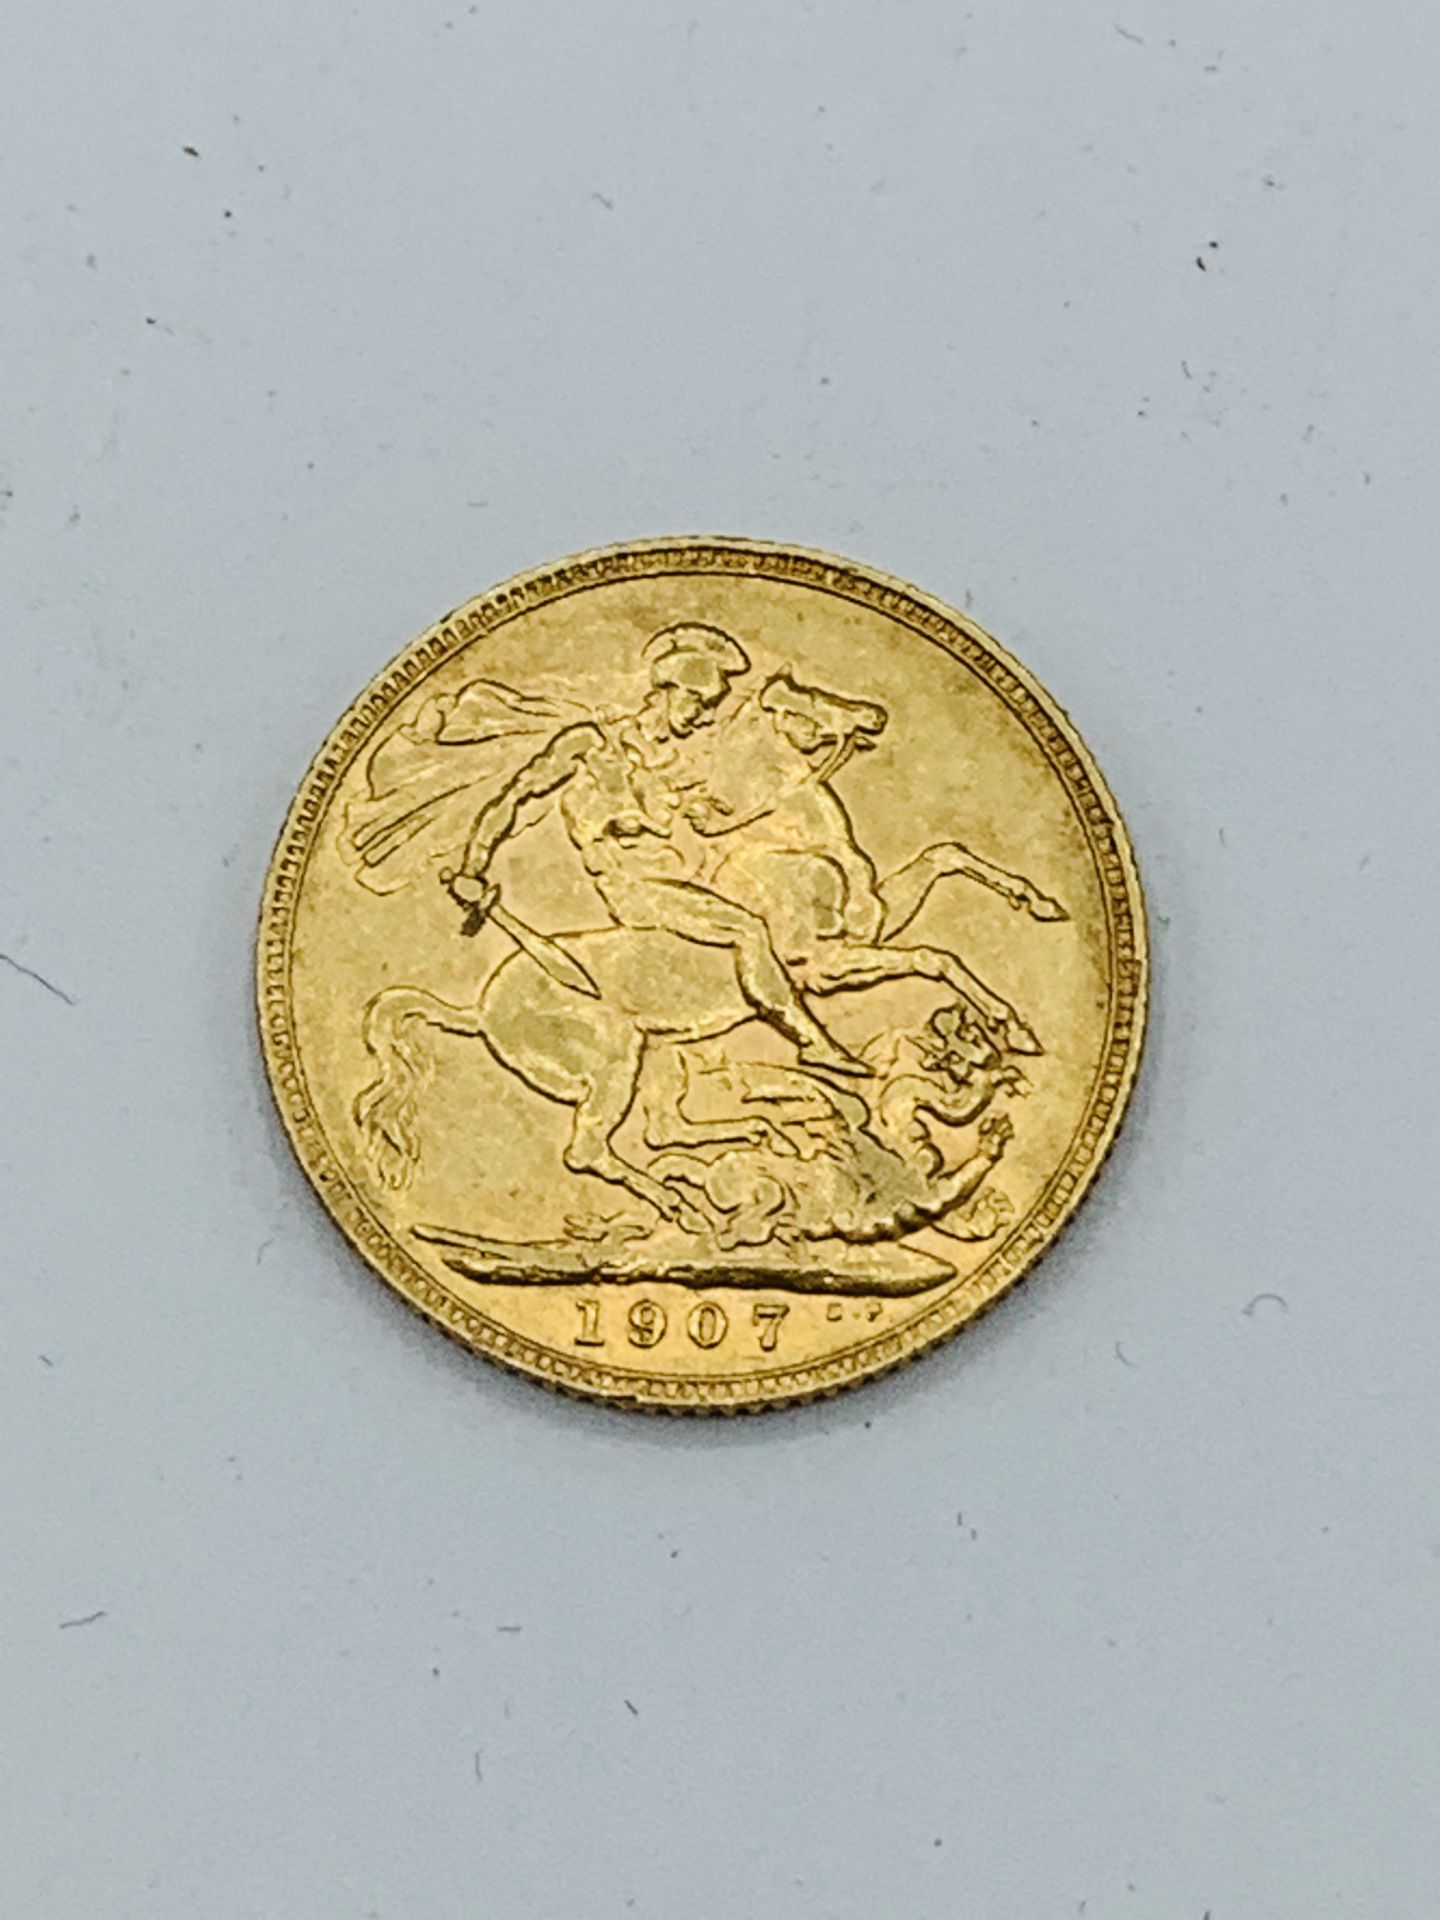 1907 Sovereign - Image 2 of 2